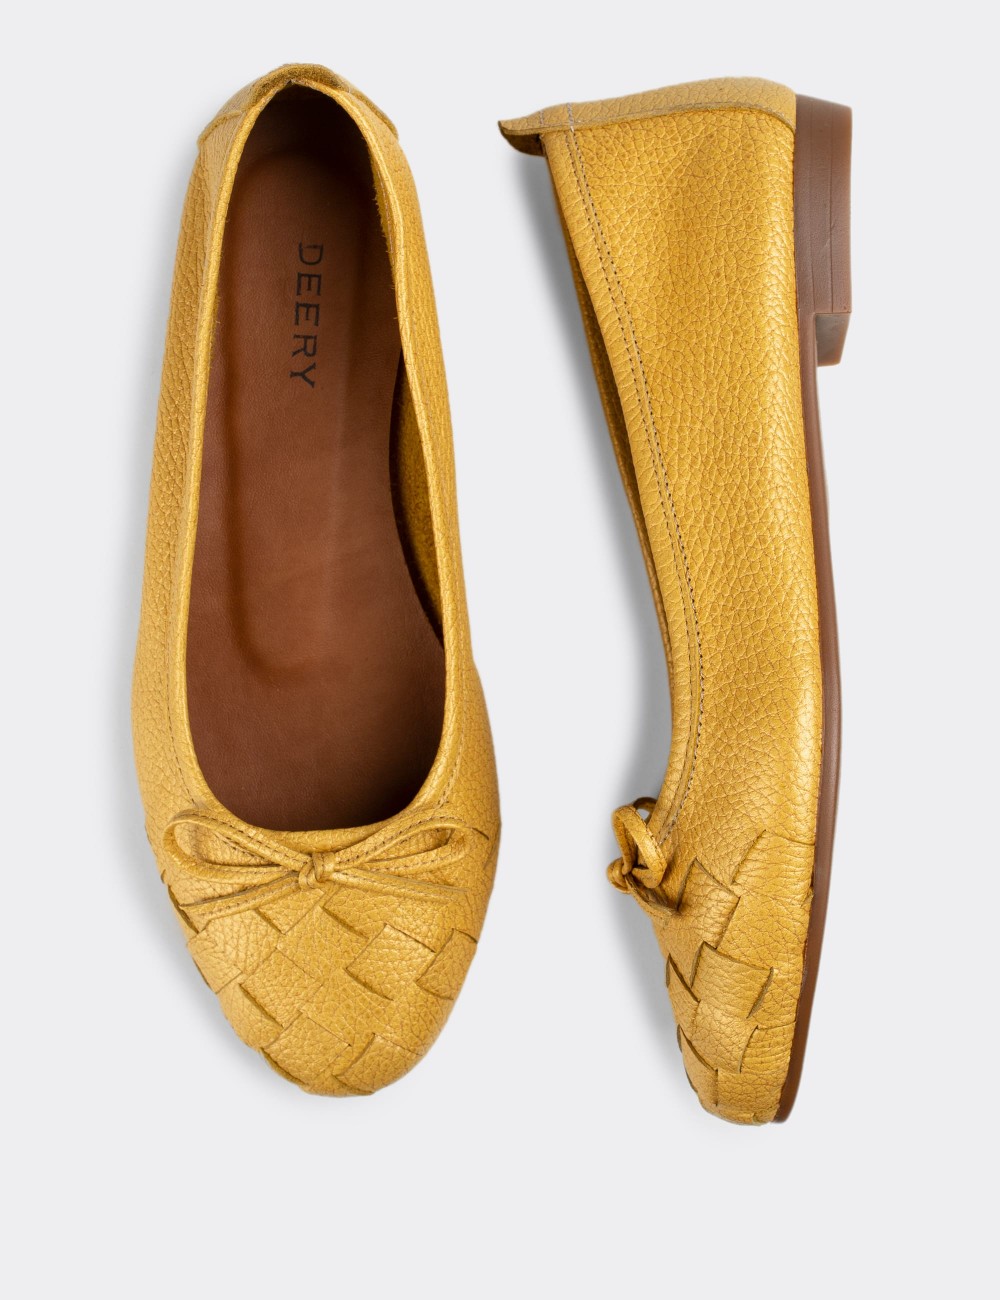 Yellow  Leather Loafers - E3205ZSRIC01